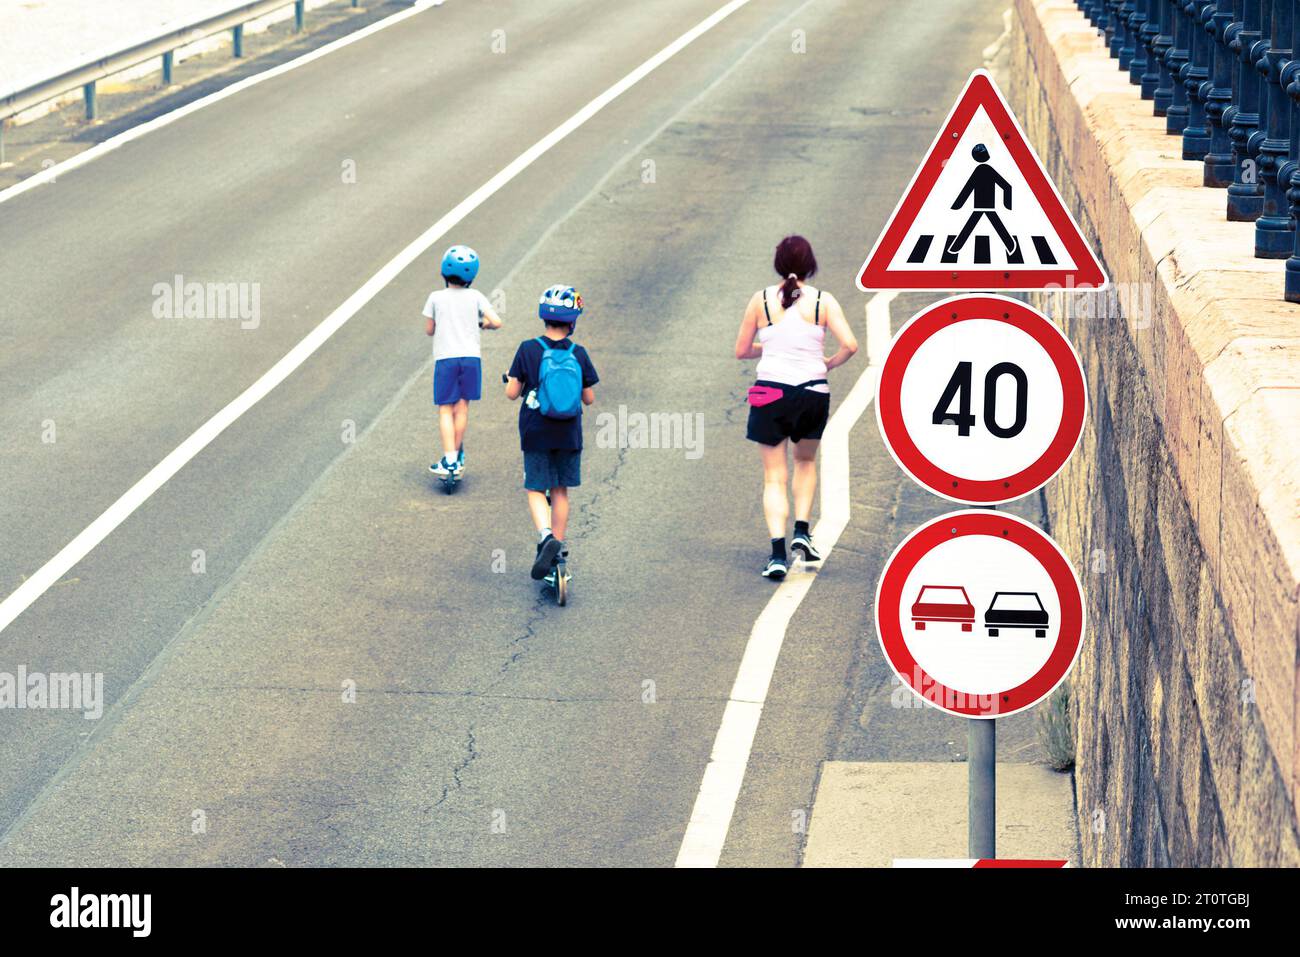 Signs on the road, running woman, kids on scooters Stock Photo